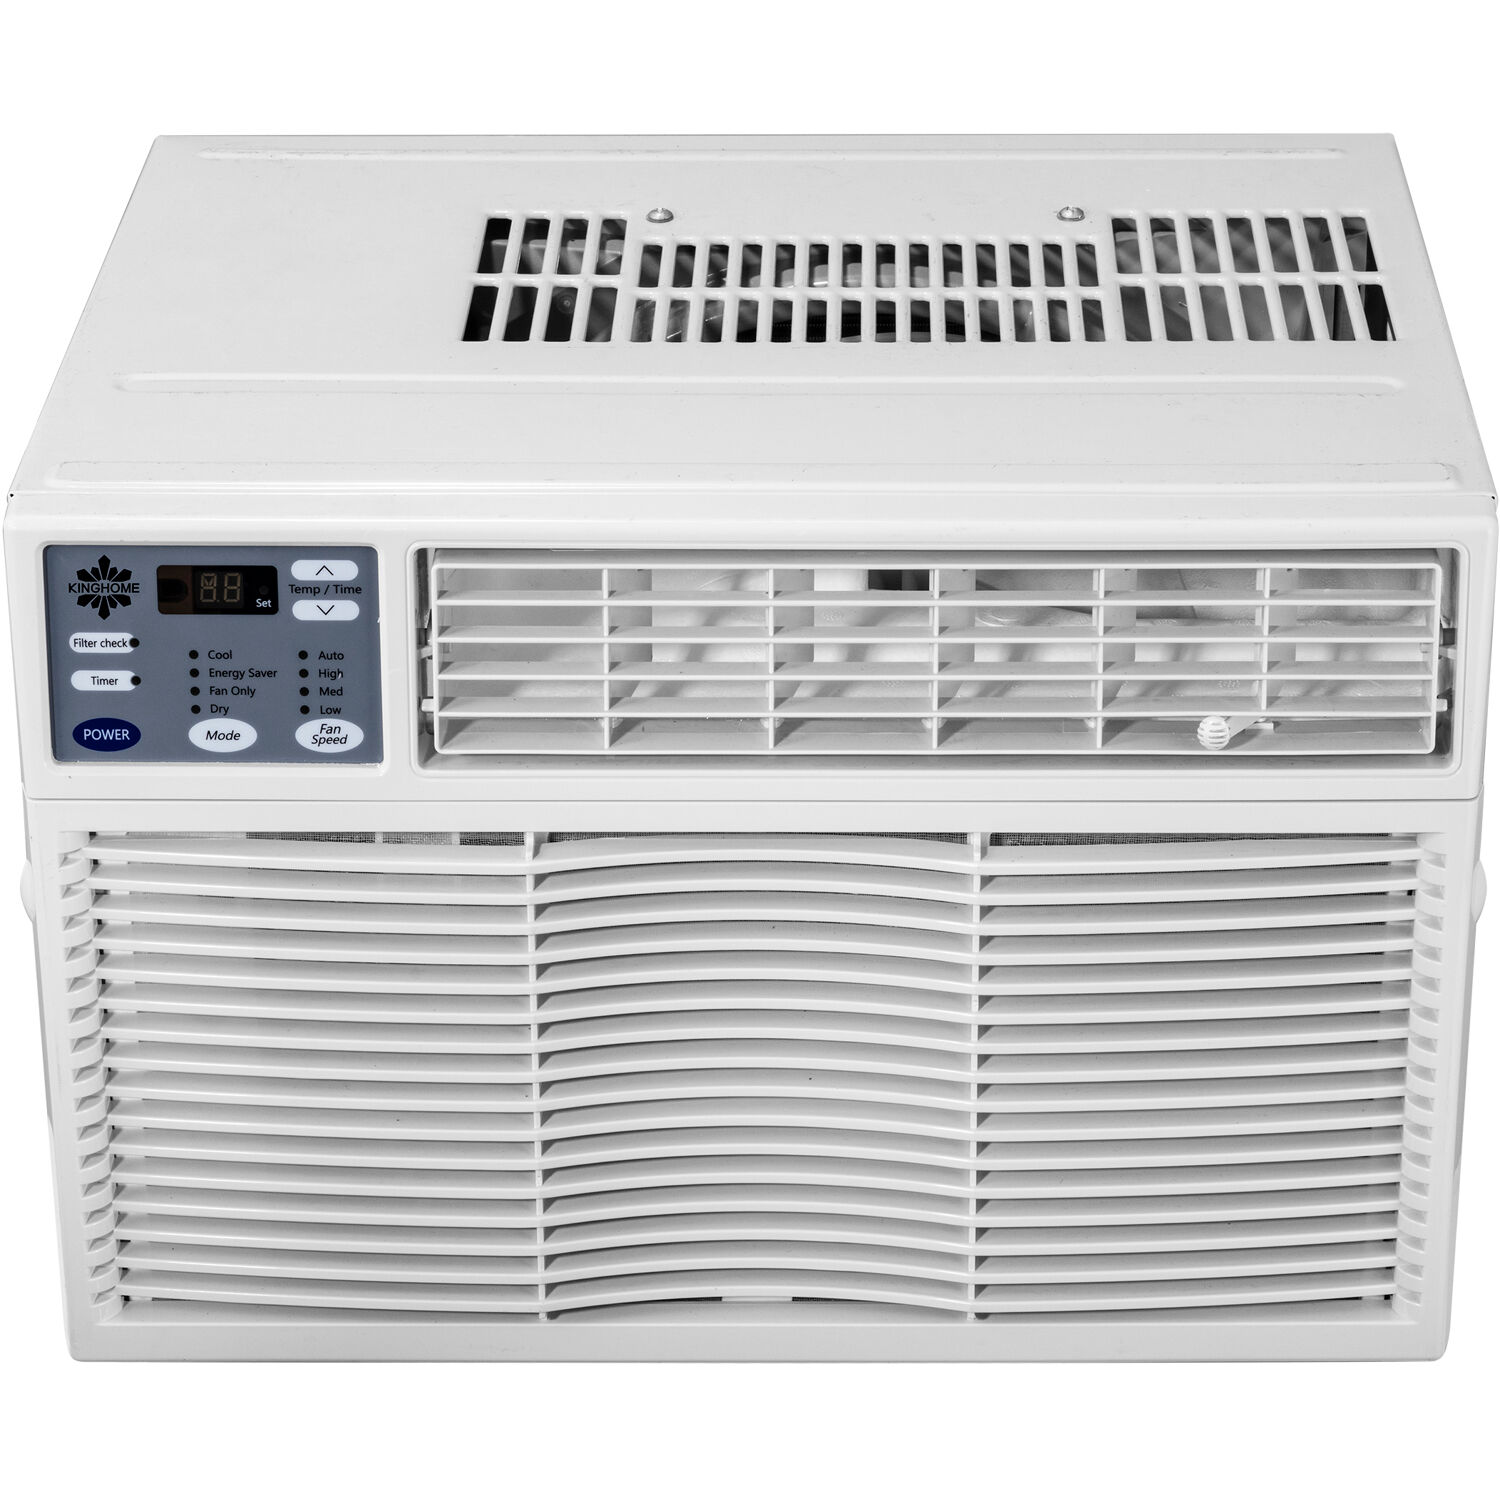 6,000 BTU Window Air Conditioner with Electronic Controls, Energy Star